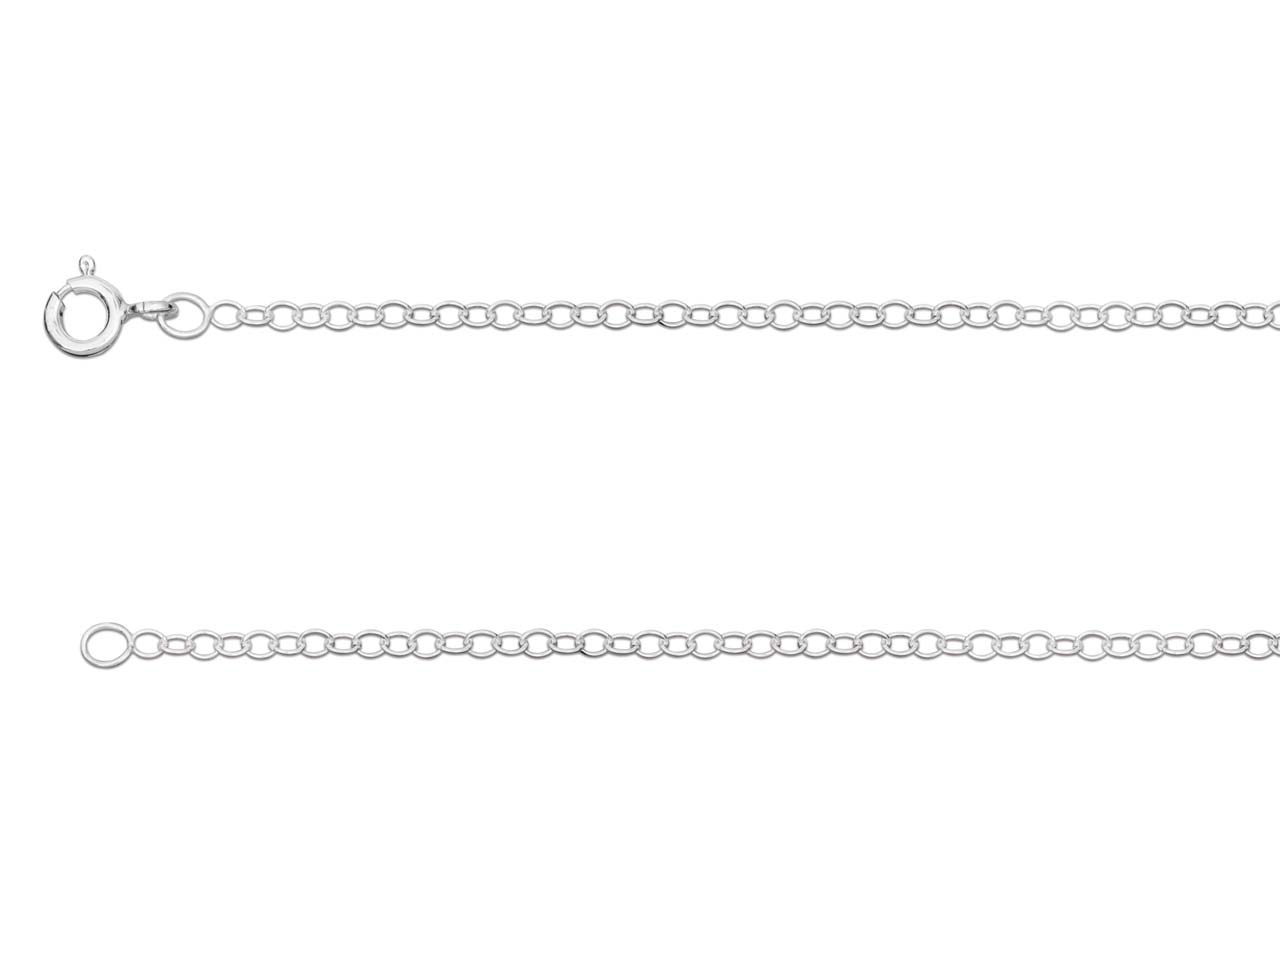  Silver sterling chain type Forçat